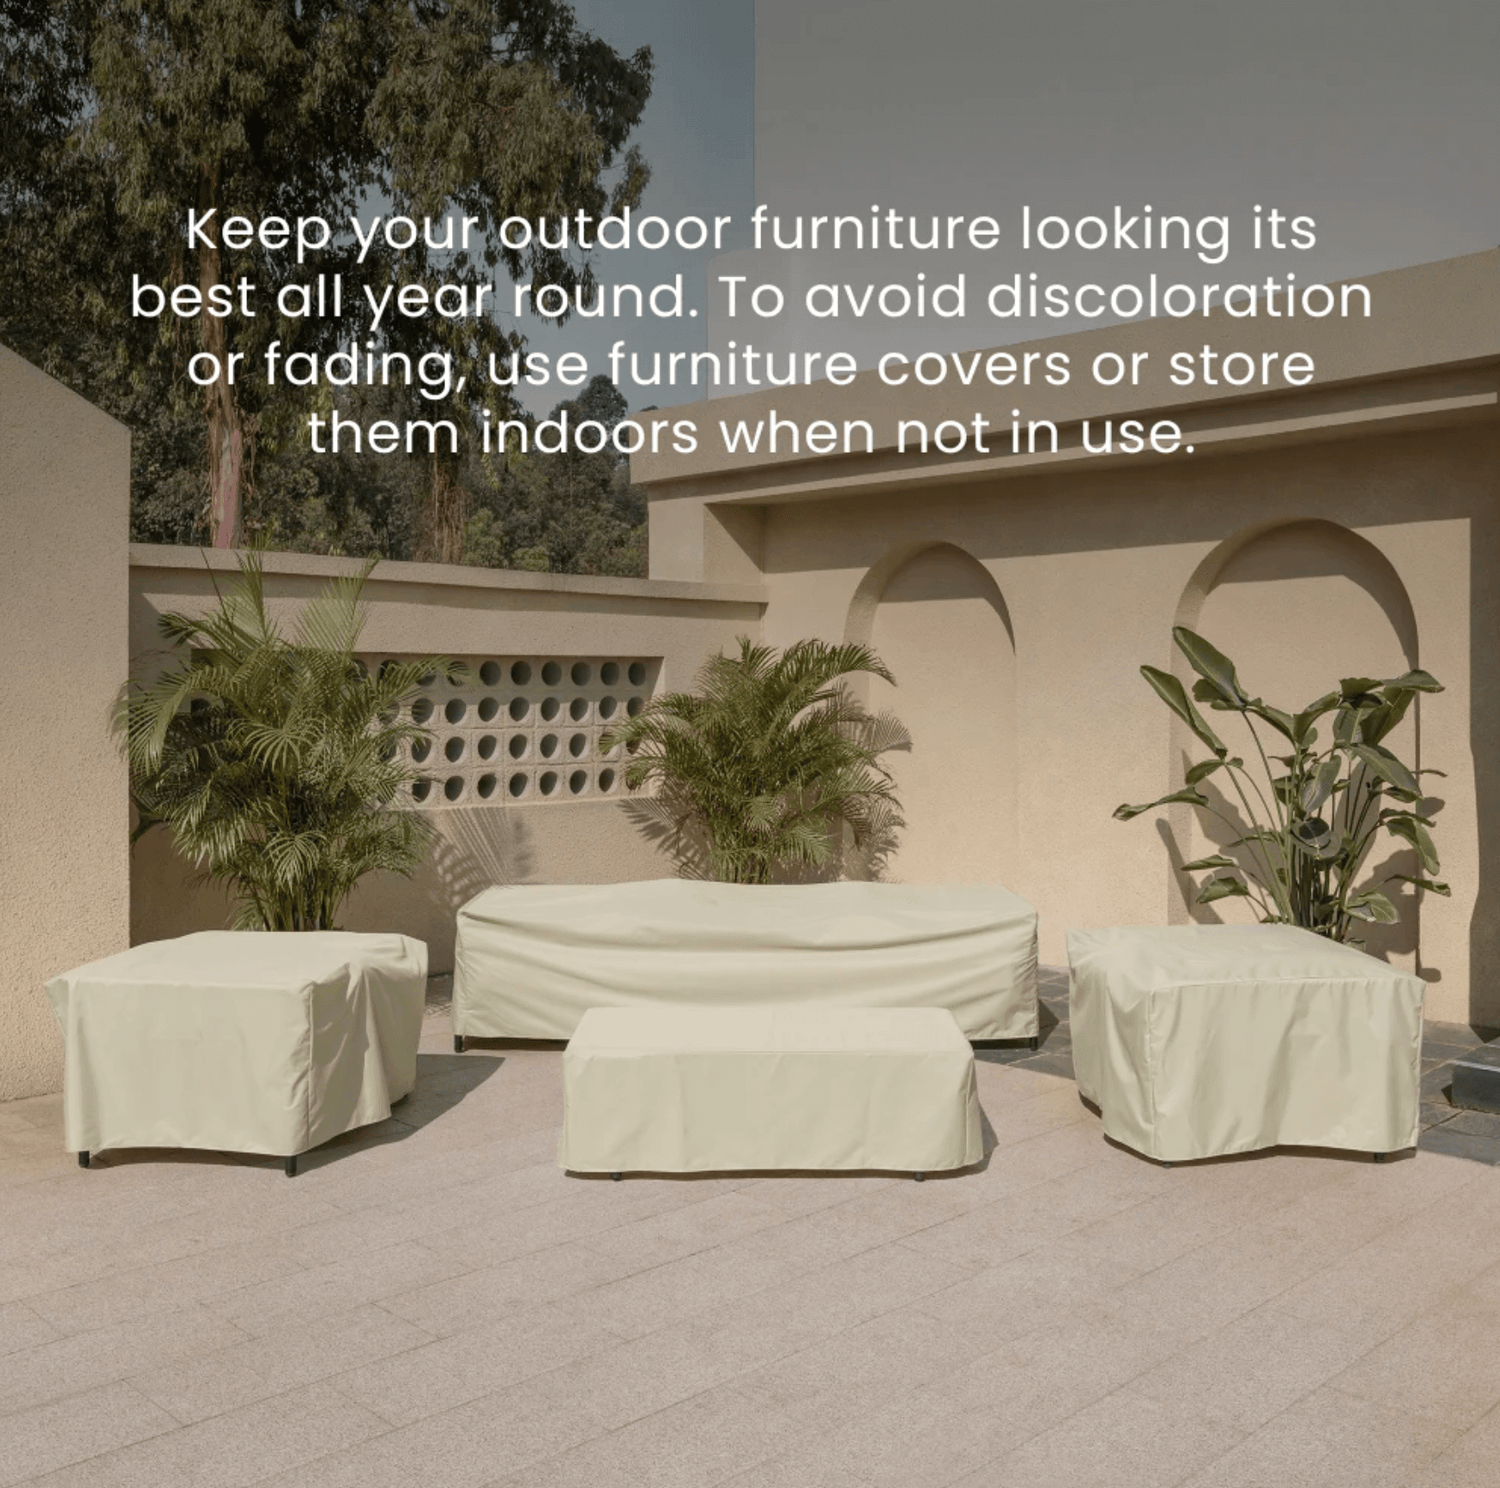 Castlery - Protect Outdoor Furniture